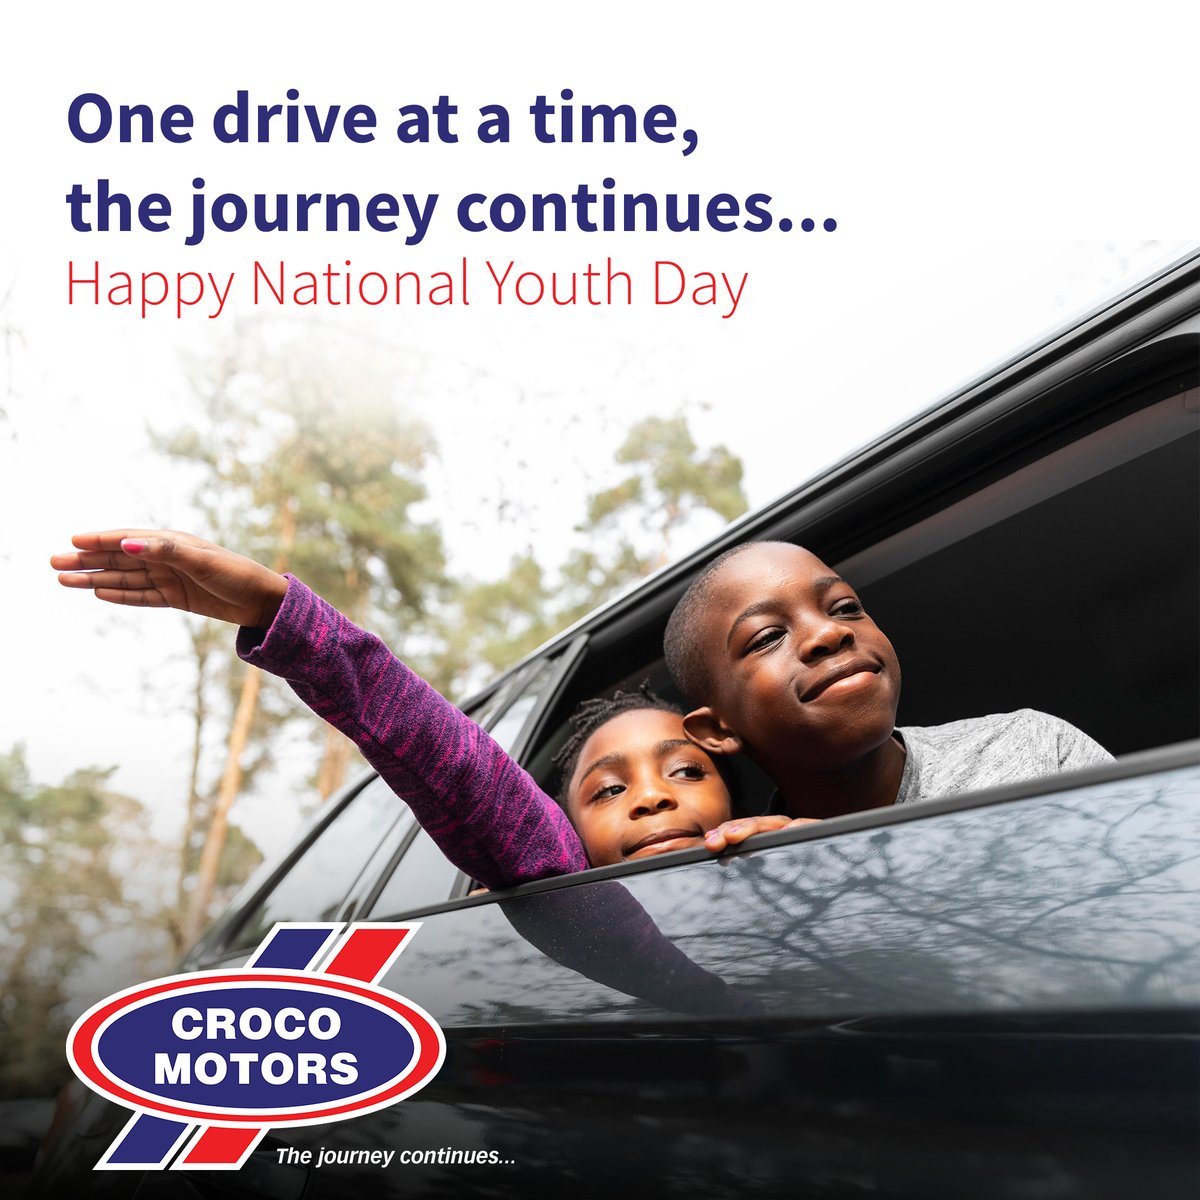 Happy National Youth Day, Zimbabwe! 🇿🇼🎉 Let's drive forward together, one kilometre at a time, with Croco Motors leading the way! 🚗💨 #NationalYouthDay #JourneyContinues #CrocoMotors #Zimbabwe